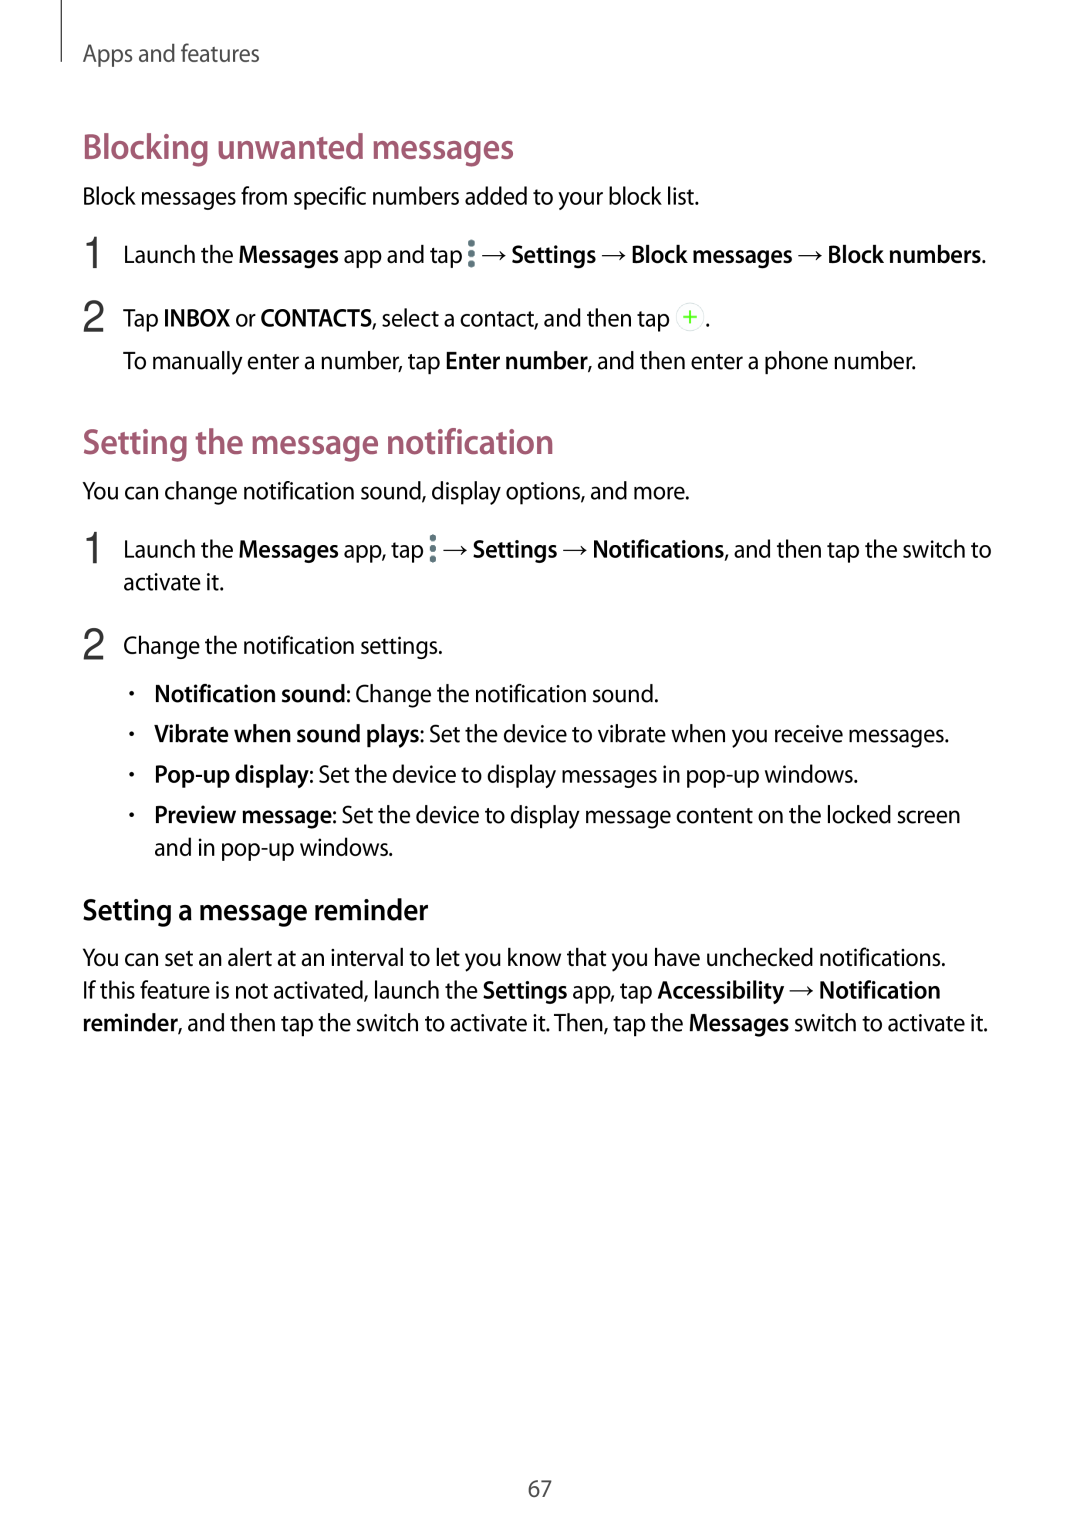 Samsung SM-A520FZKAETL manual Blocking unwanted messages, Setting the message notification, Setting a message reminder 